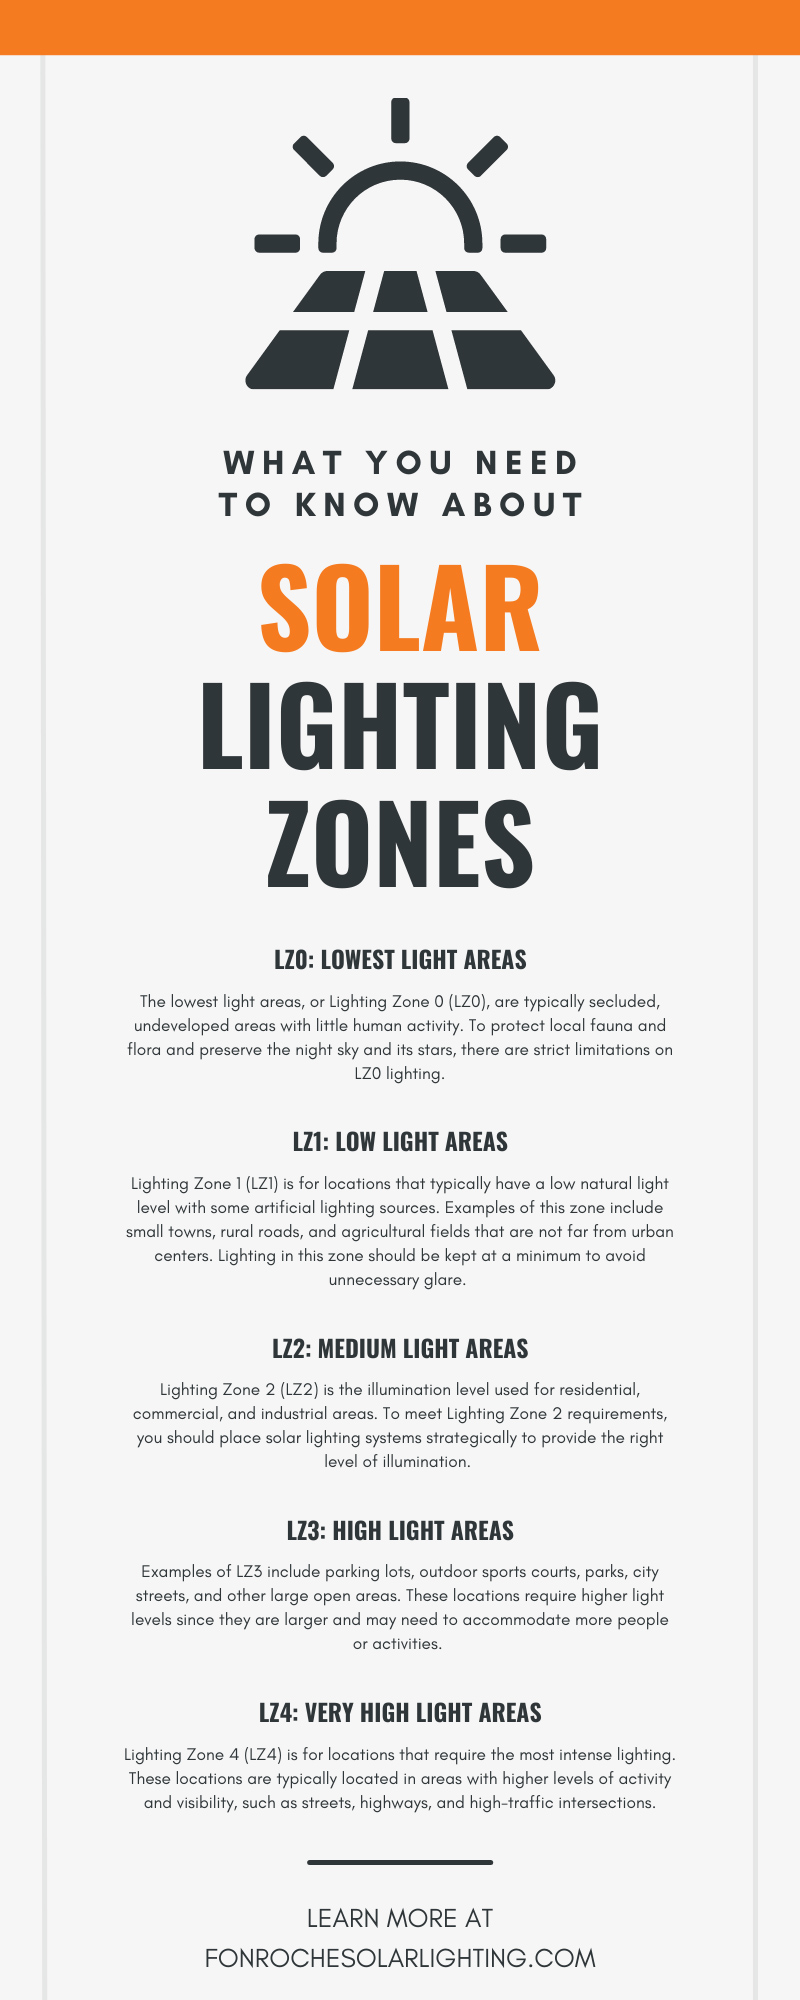 What You Need to Know About Solar Lighting Zones 